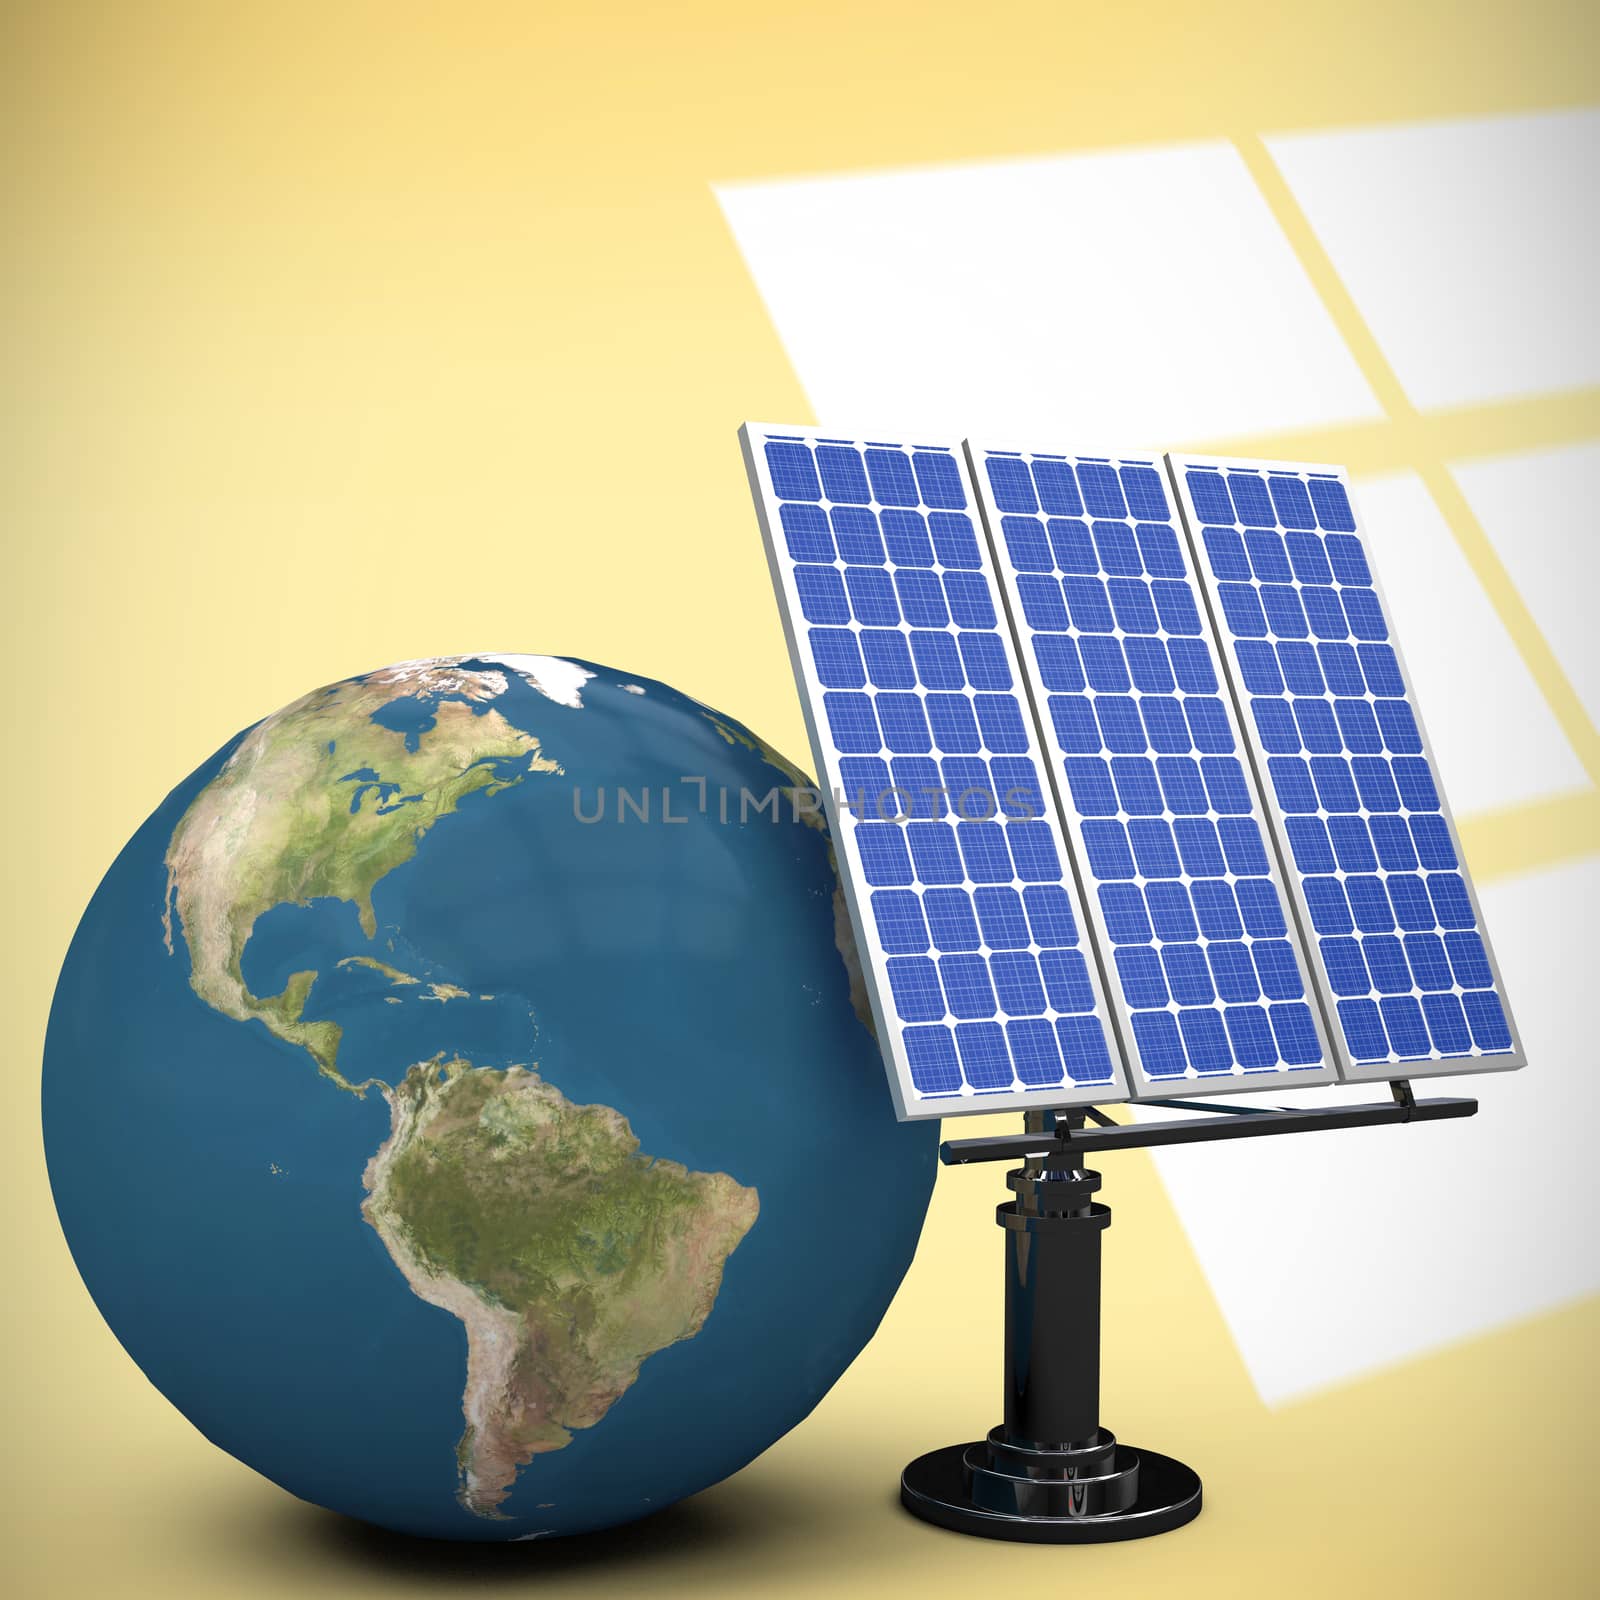 3d image of globe with solar equipment against white squares on yellow background